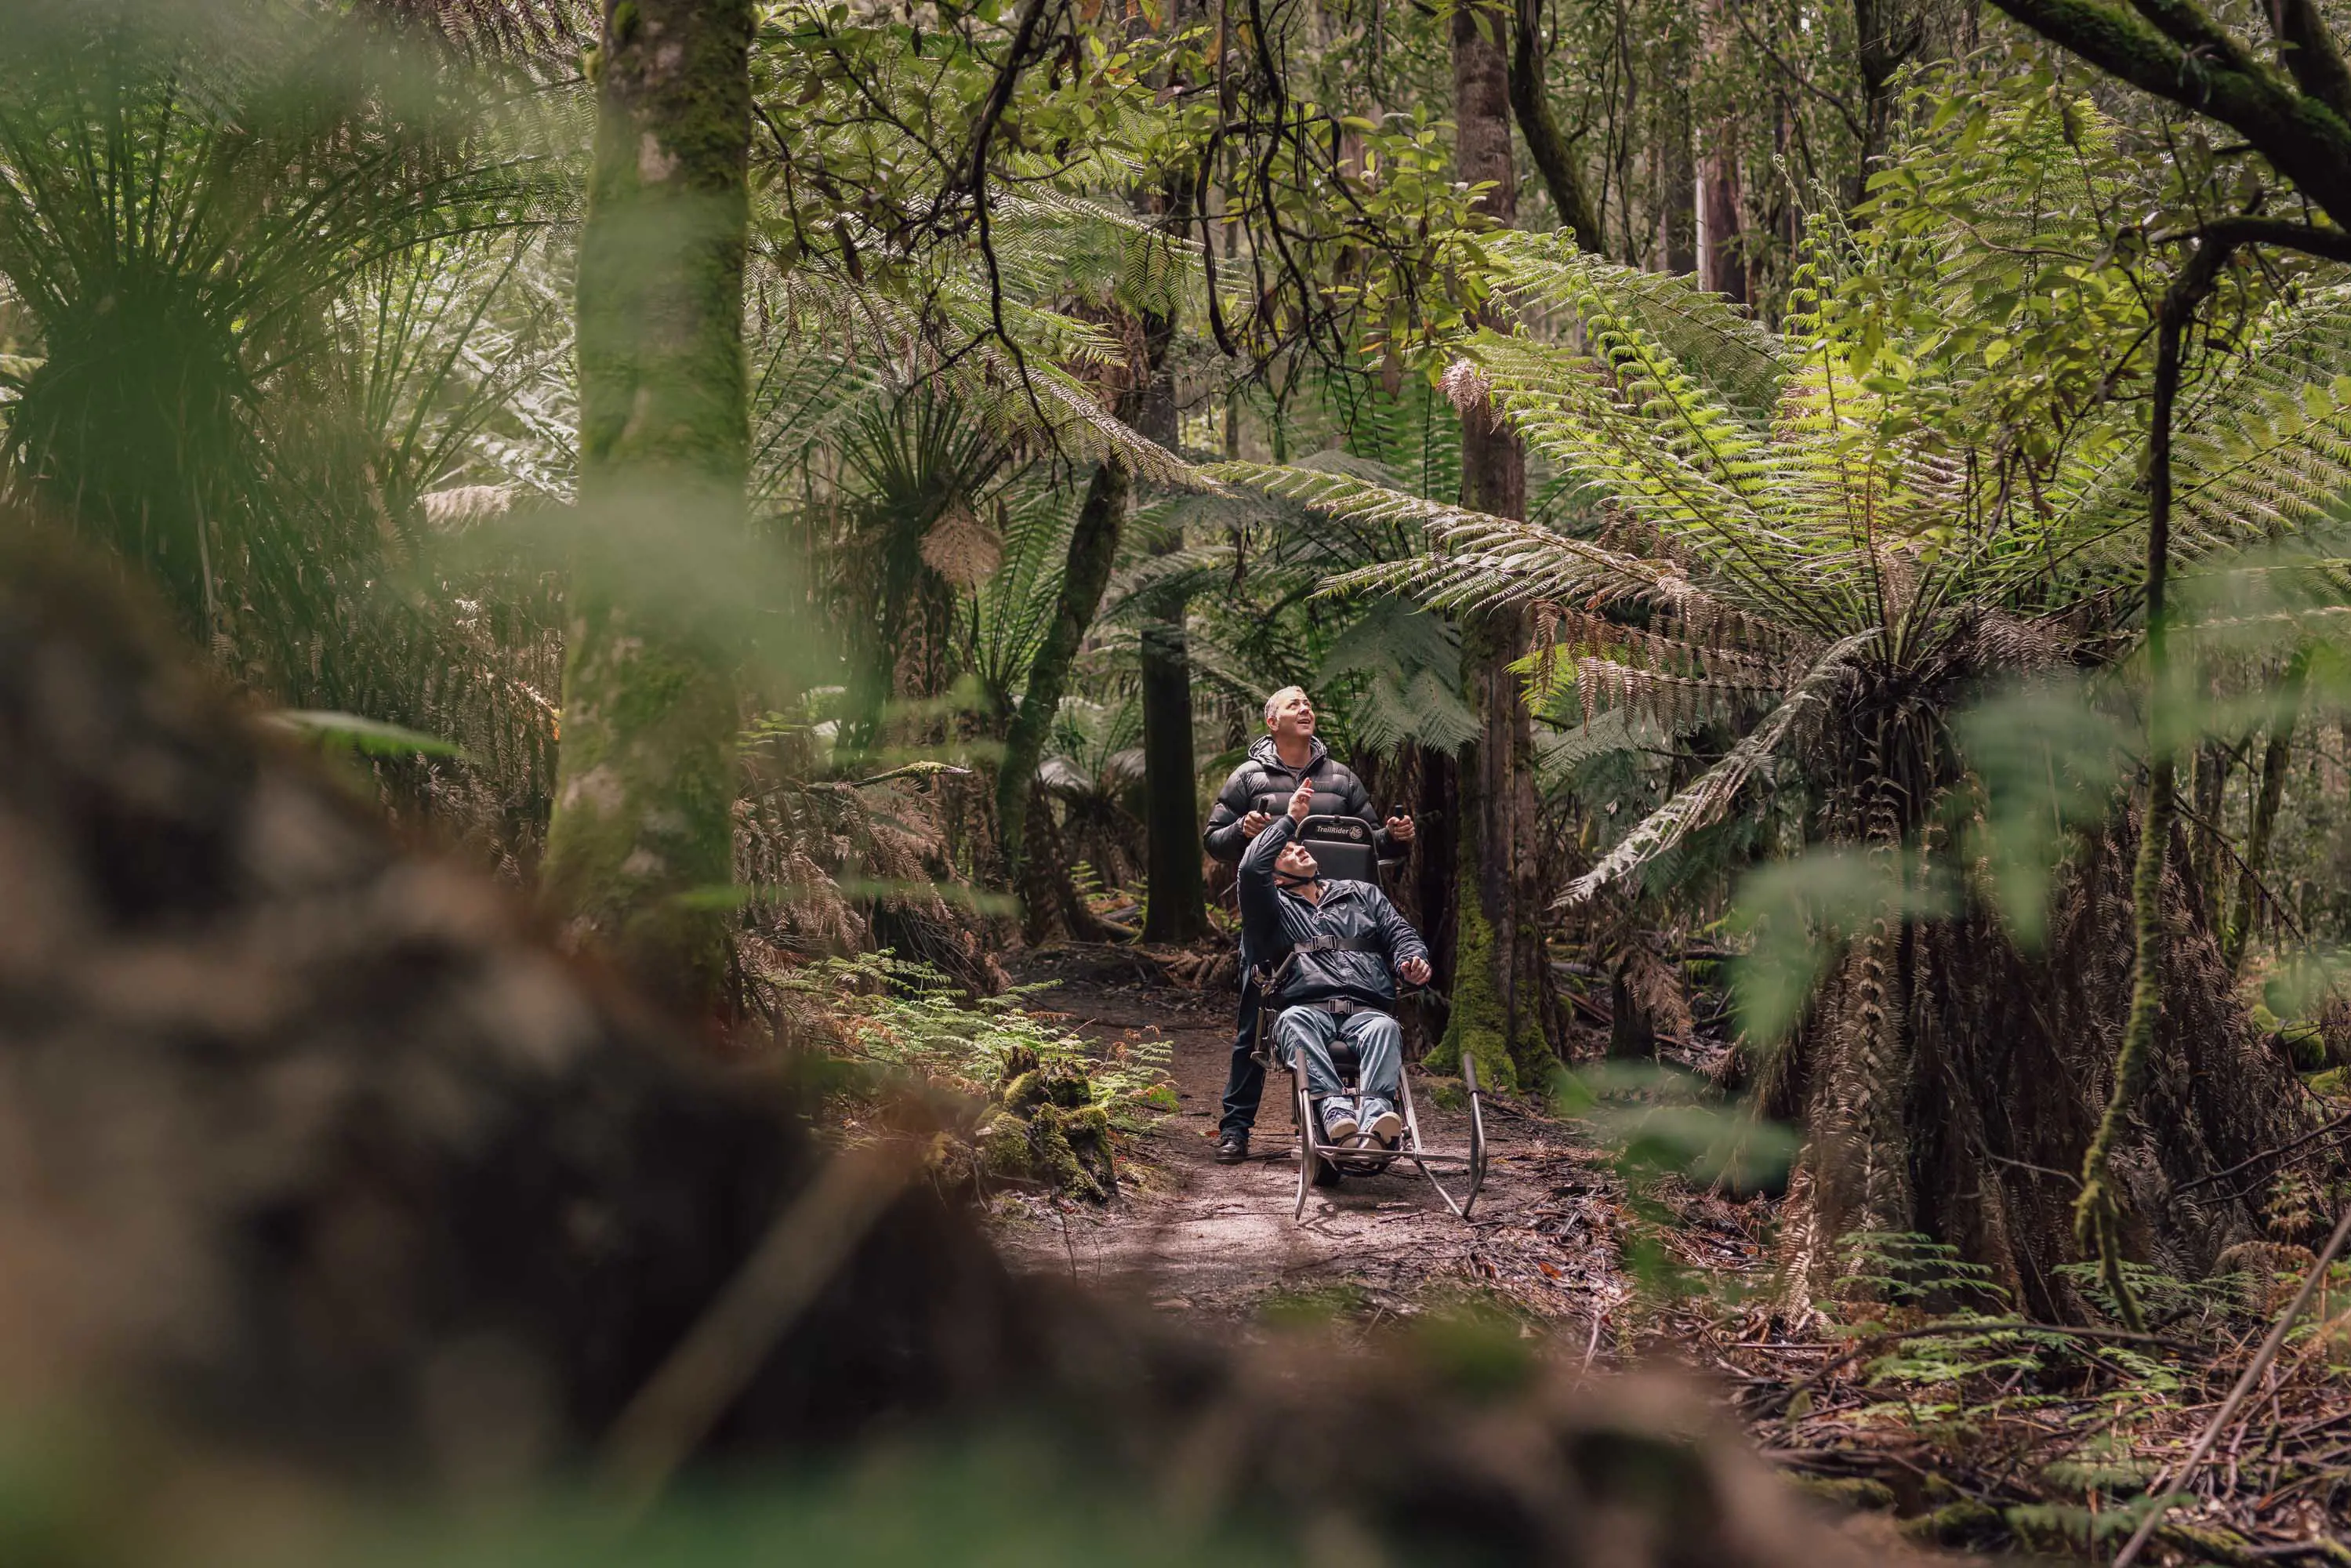 Two people, one in a modified trail rider wheelchair, walk along pathway bordered with tall ferns and thick, moss-covered trees.